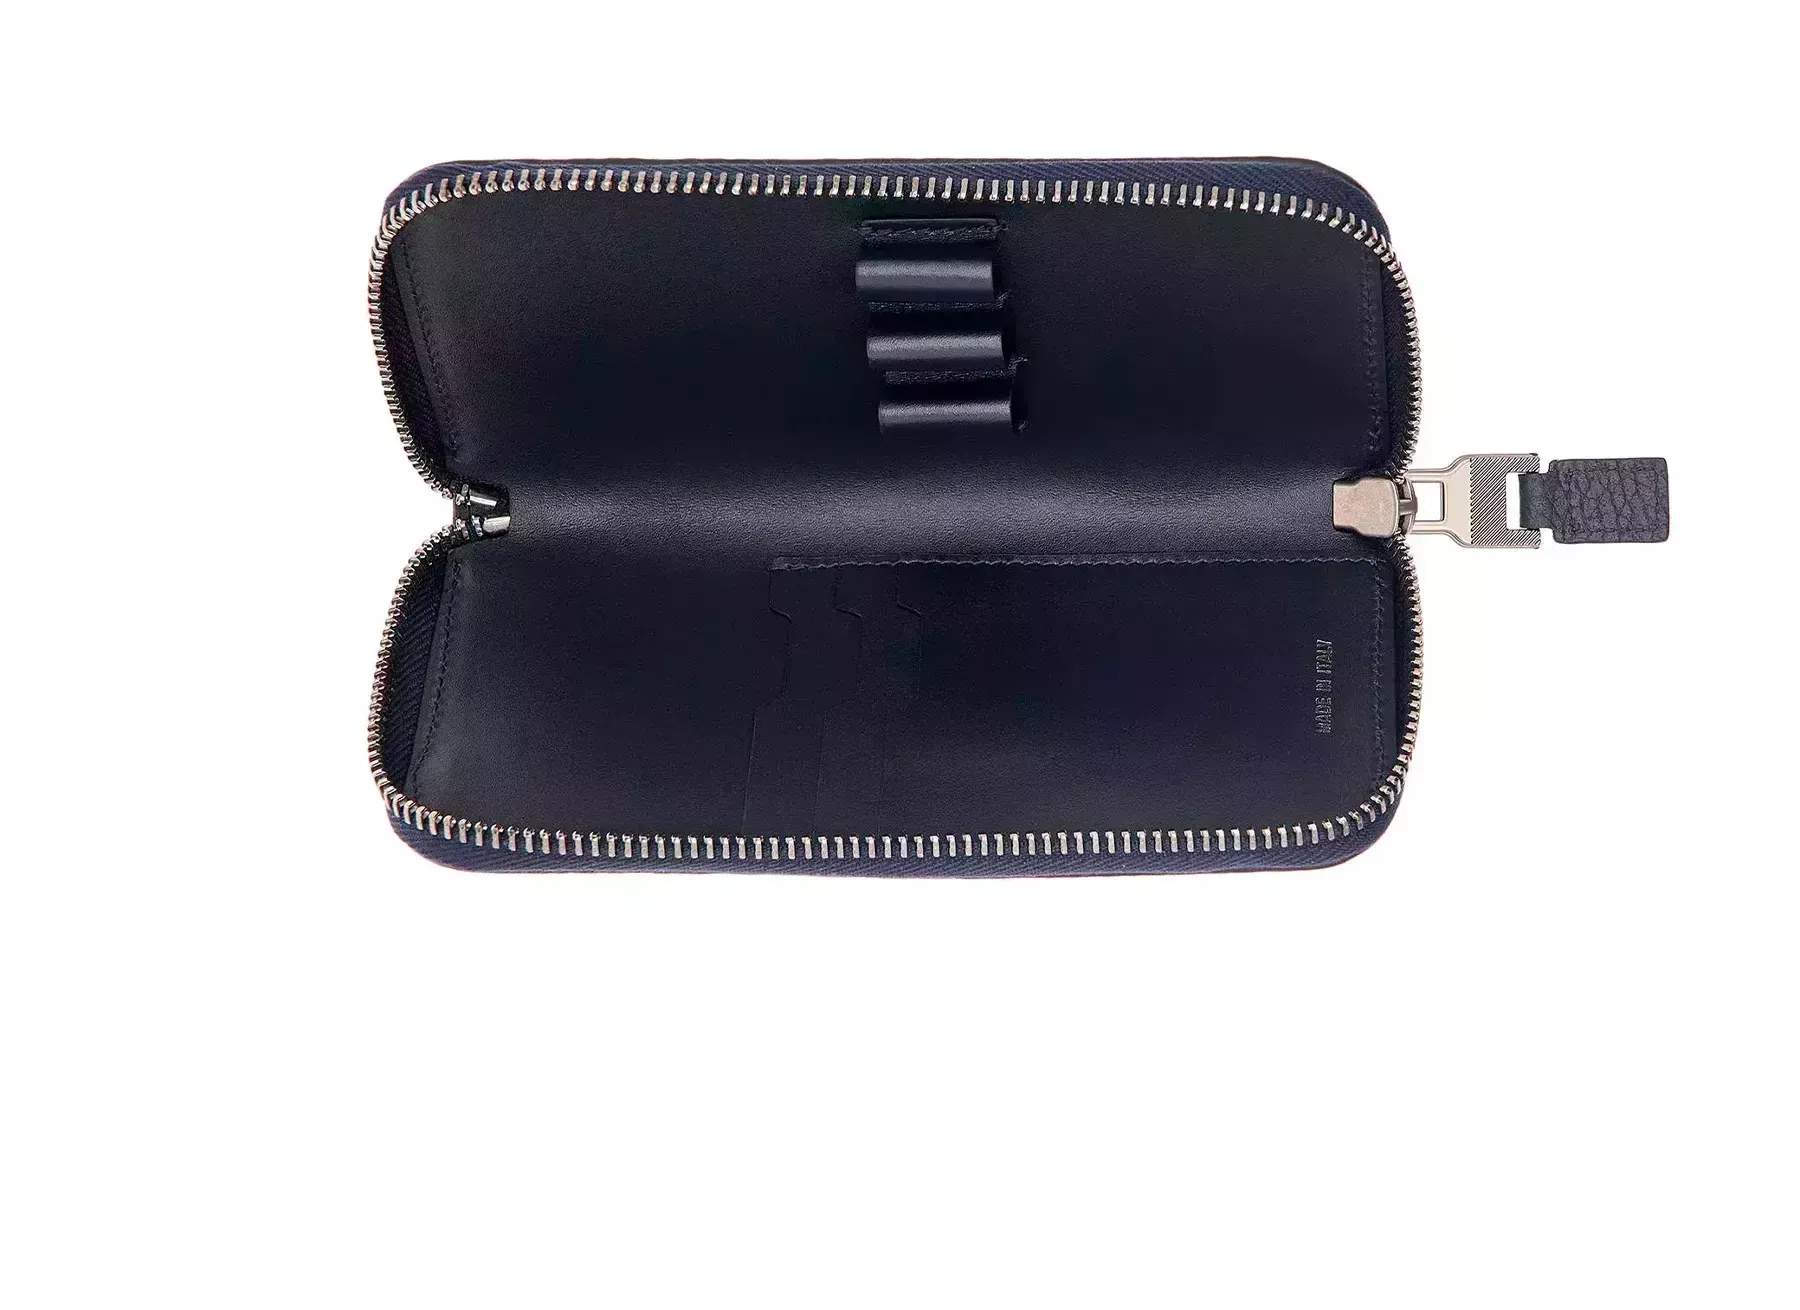 Grained Collection Zipped Pencil Case